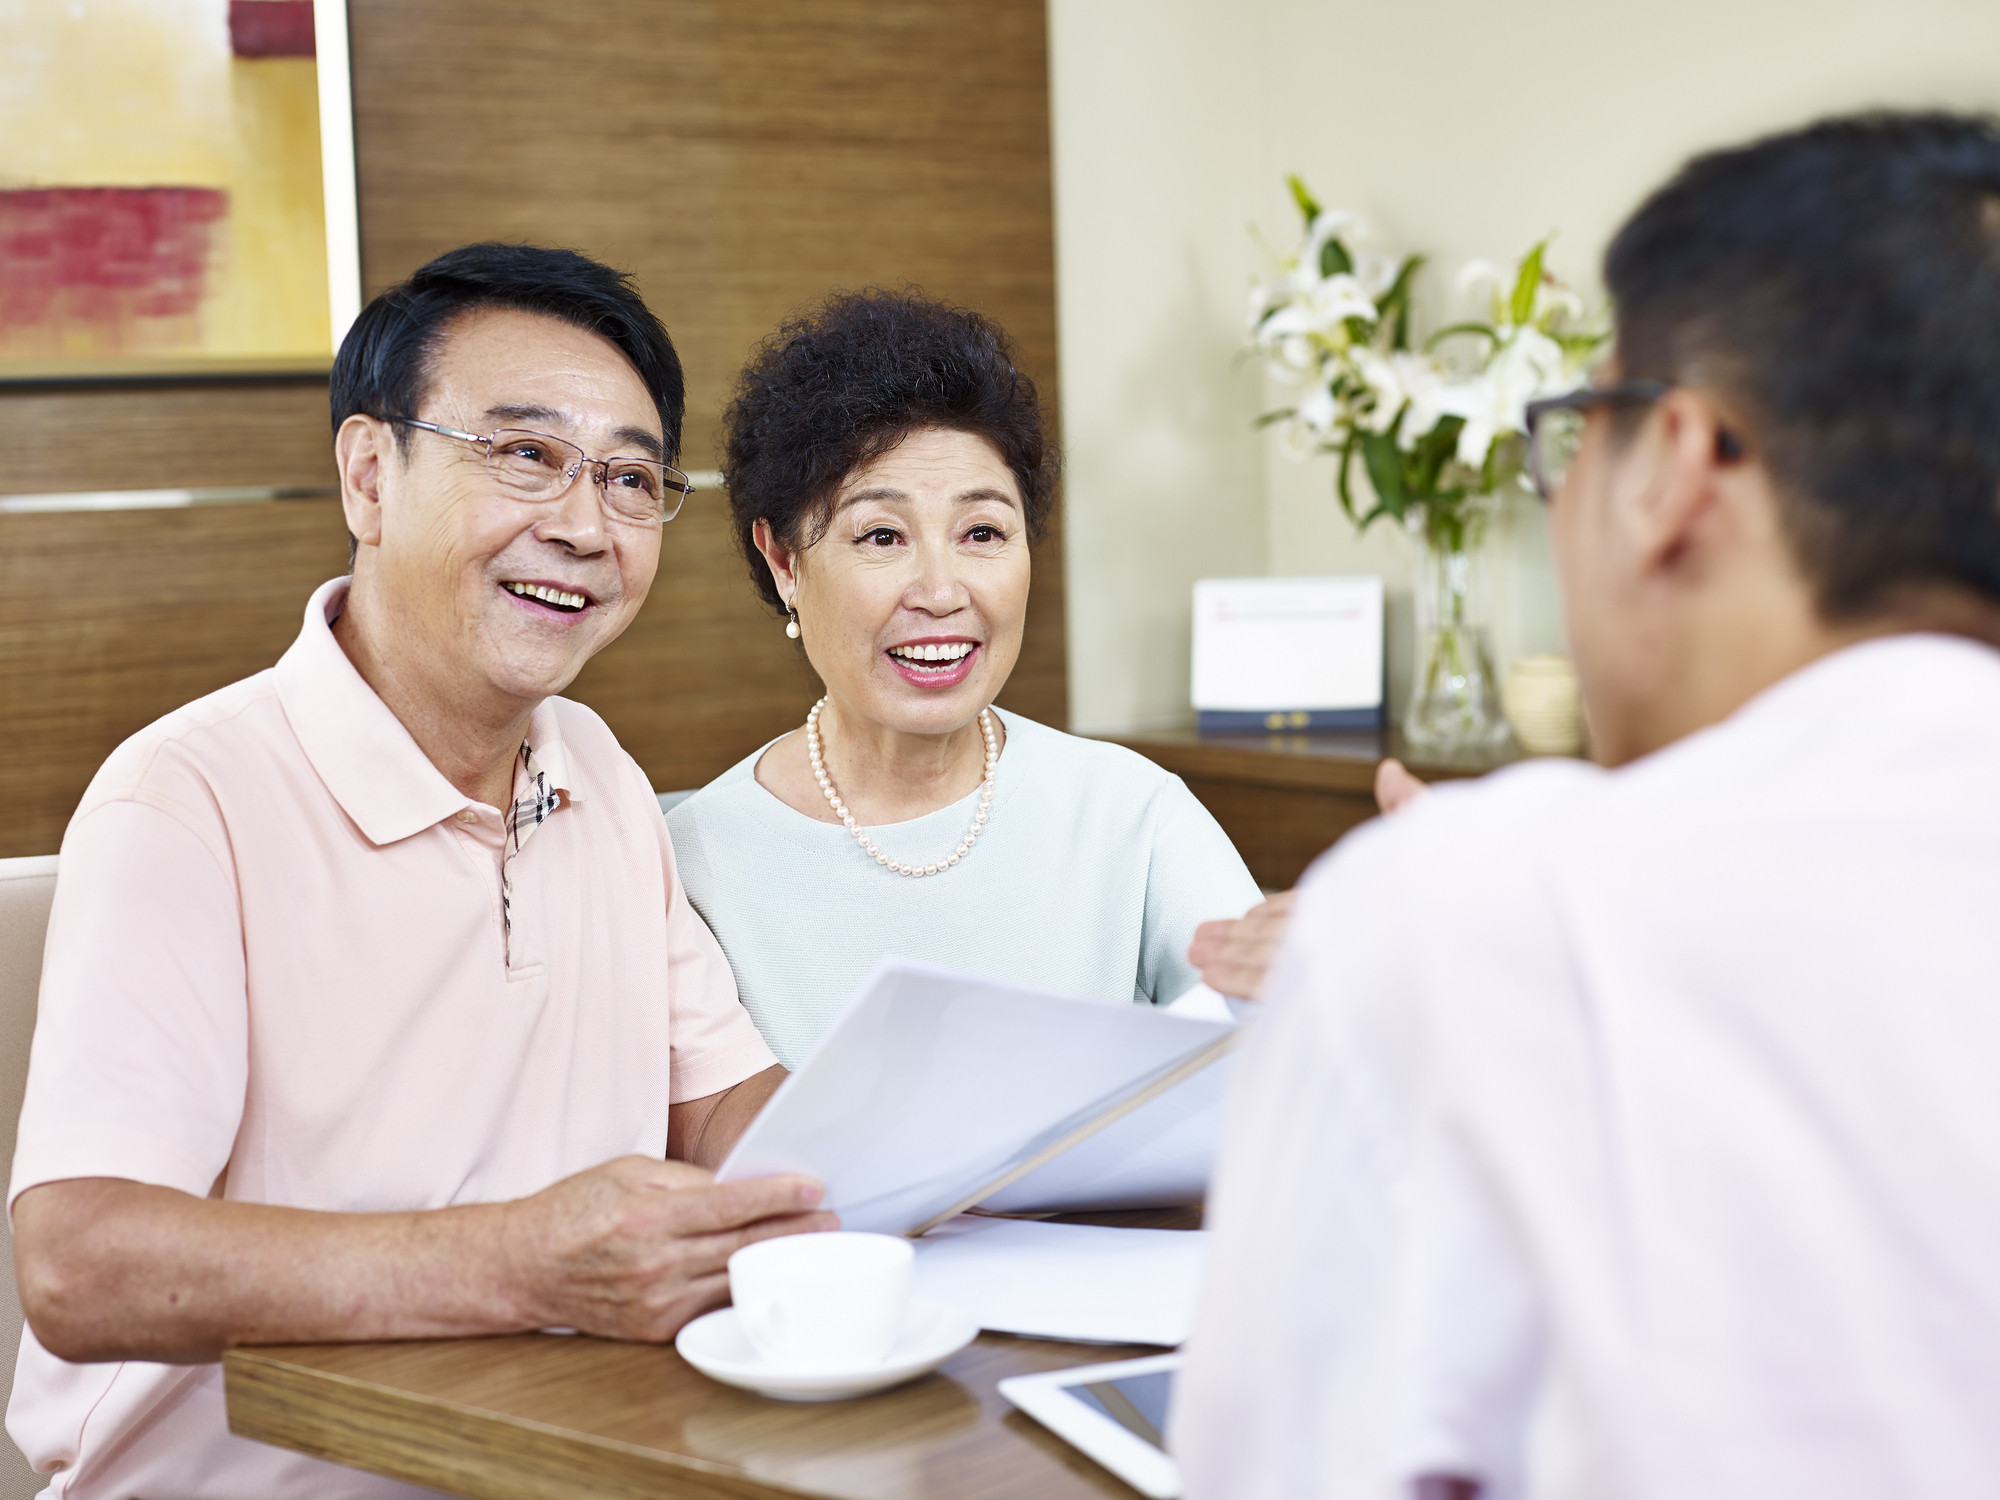 Stock image of senior asian couple meeting with realtor, who is showing them a piece of paper